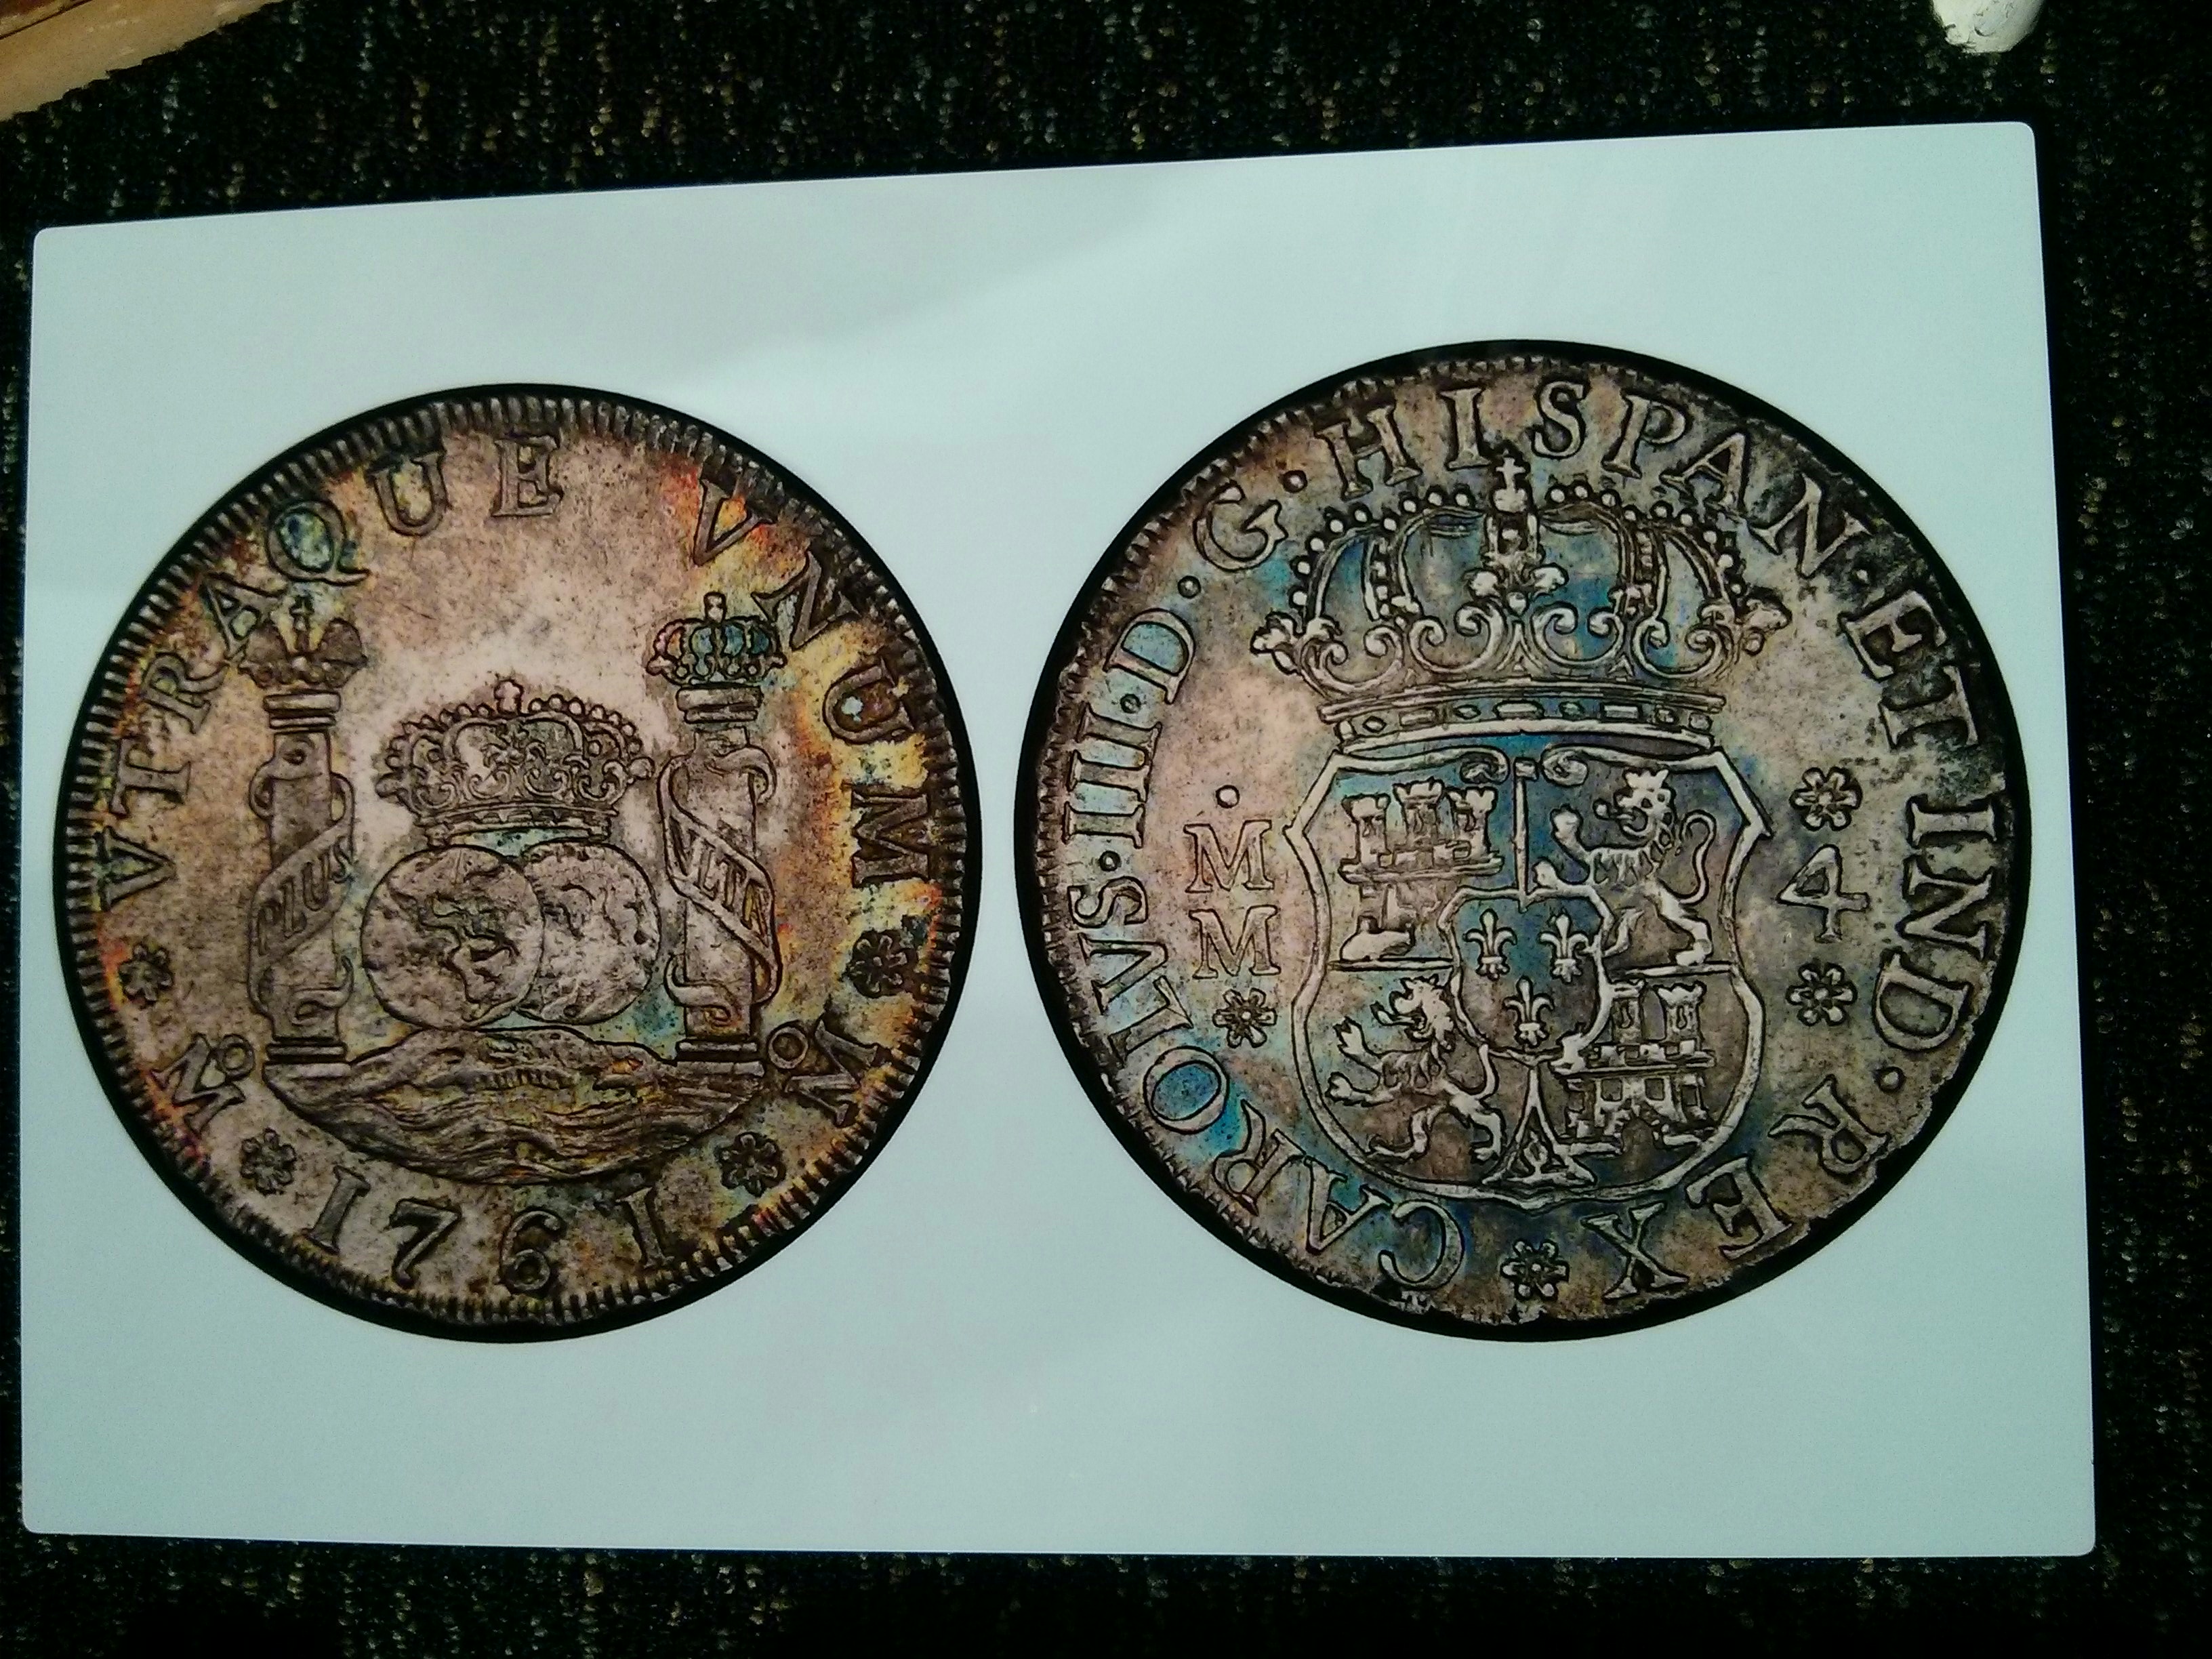 1761 4 Reales made with sublimation printing